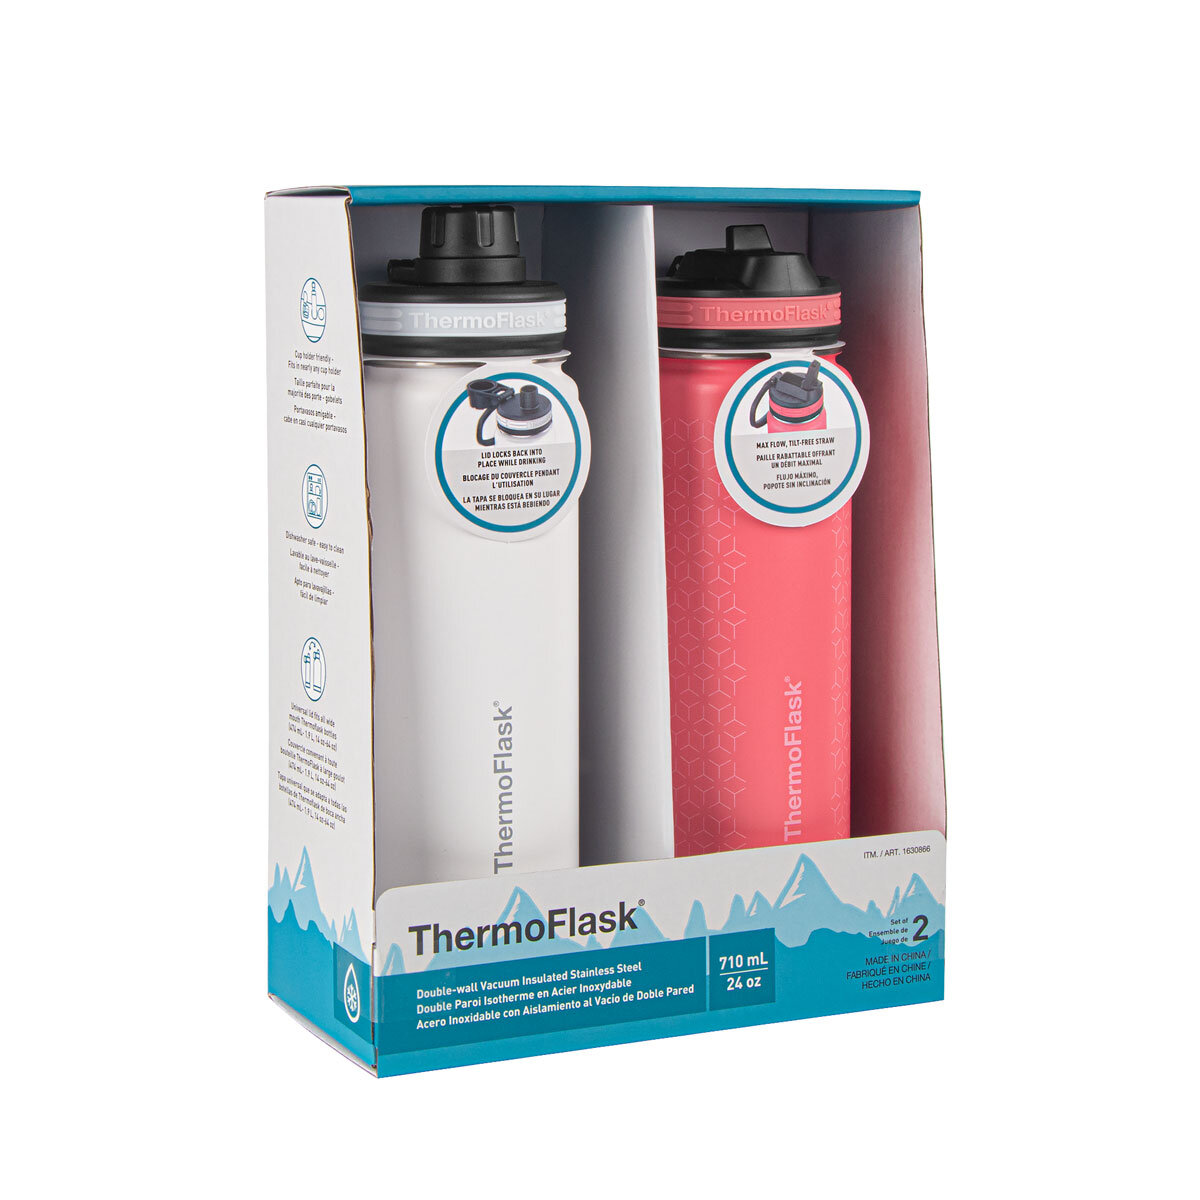 Thermoflask Stainless Steel Bottle 710ml, 2 Pack